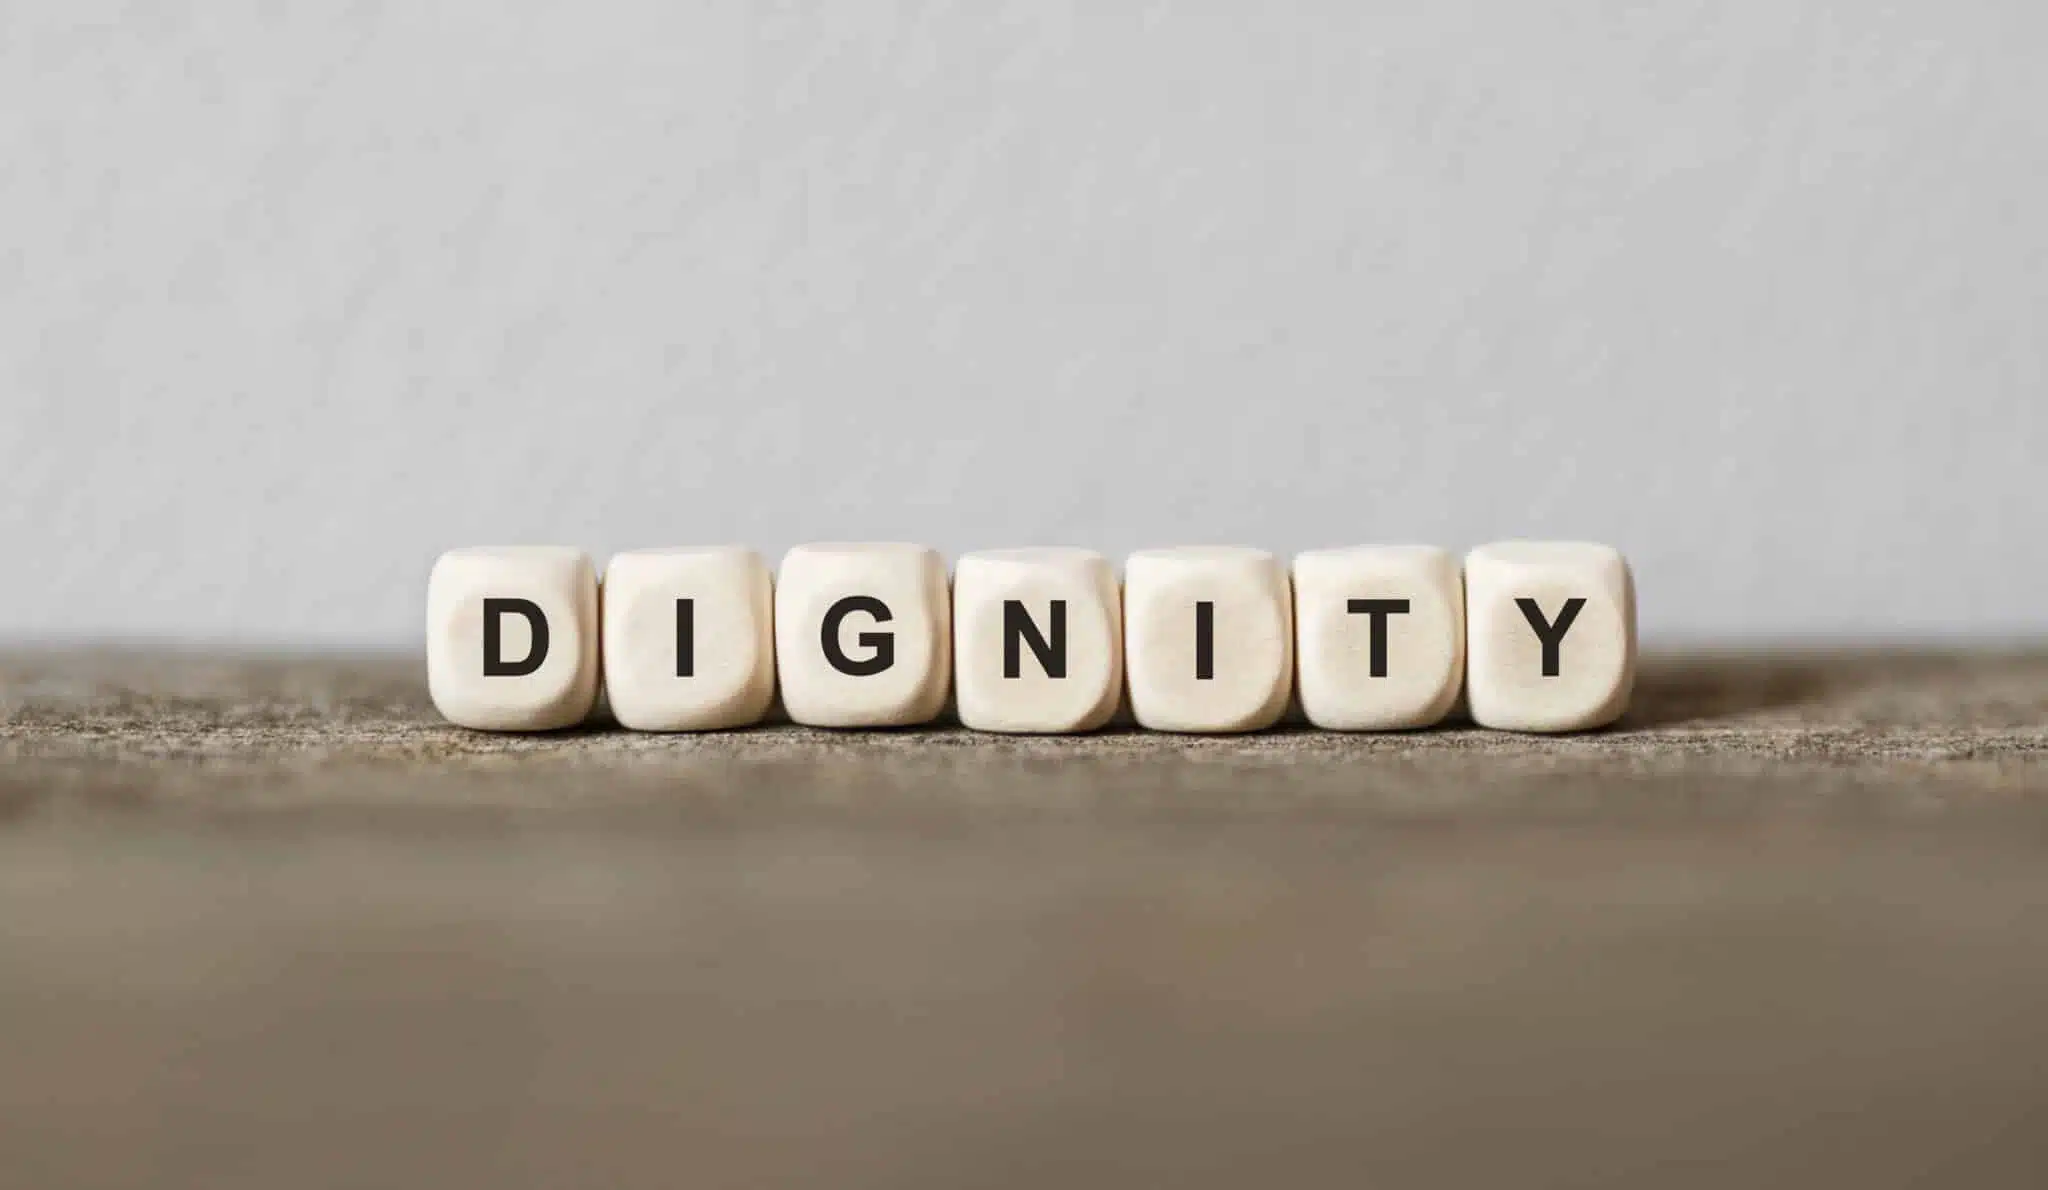 Word DIGNITY made with wood building blocks,stock image